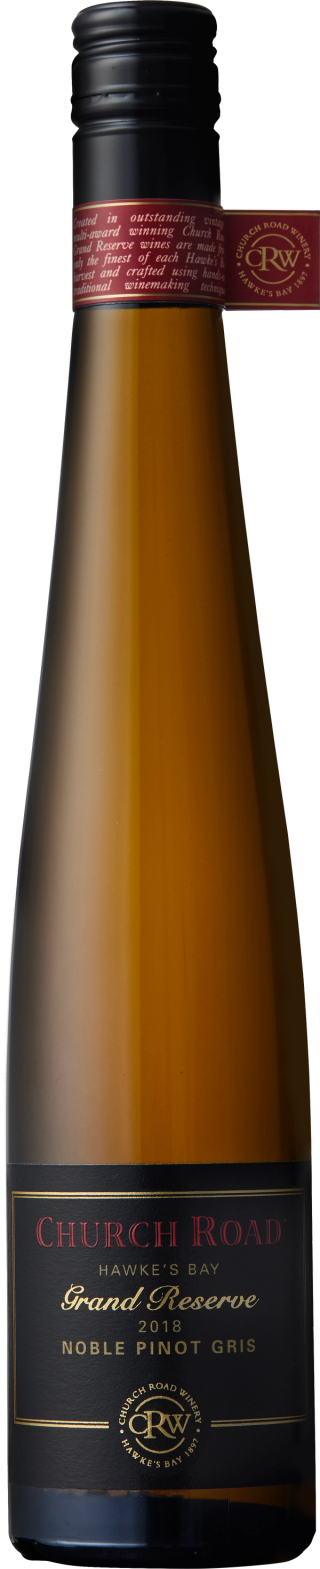 Church Road Grand Reserve Noble Pinot Gris 2018